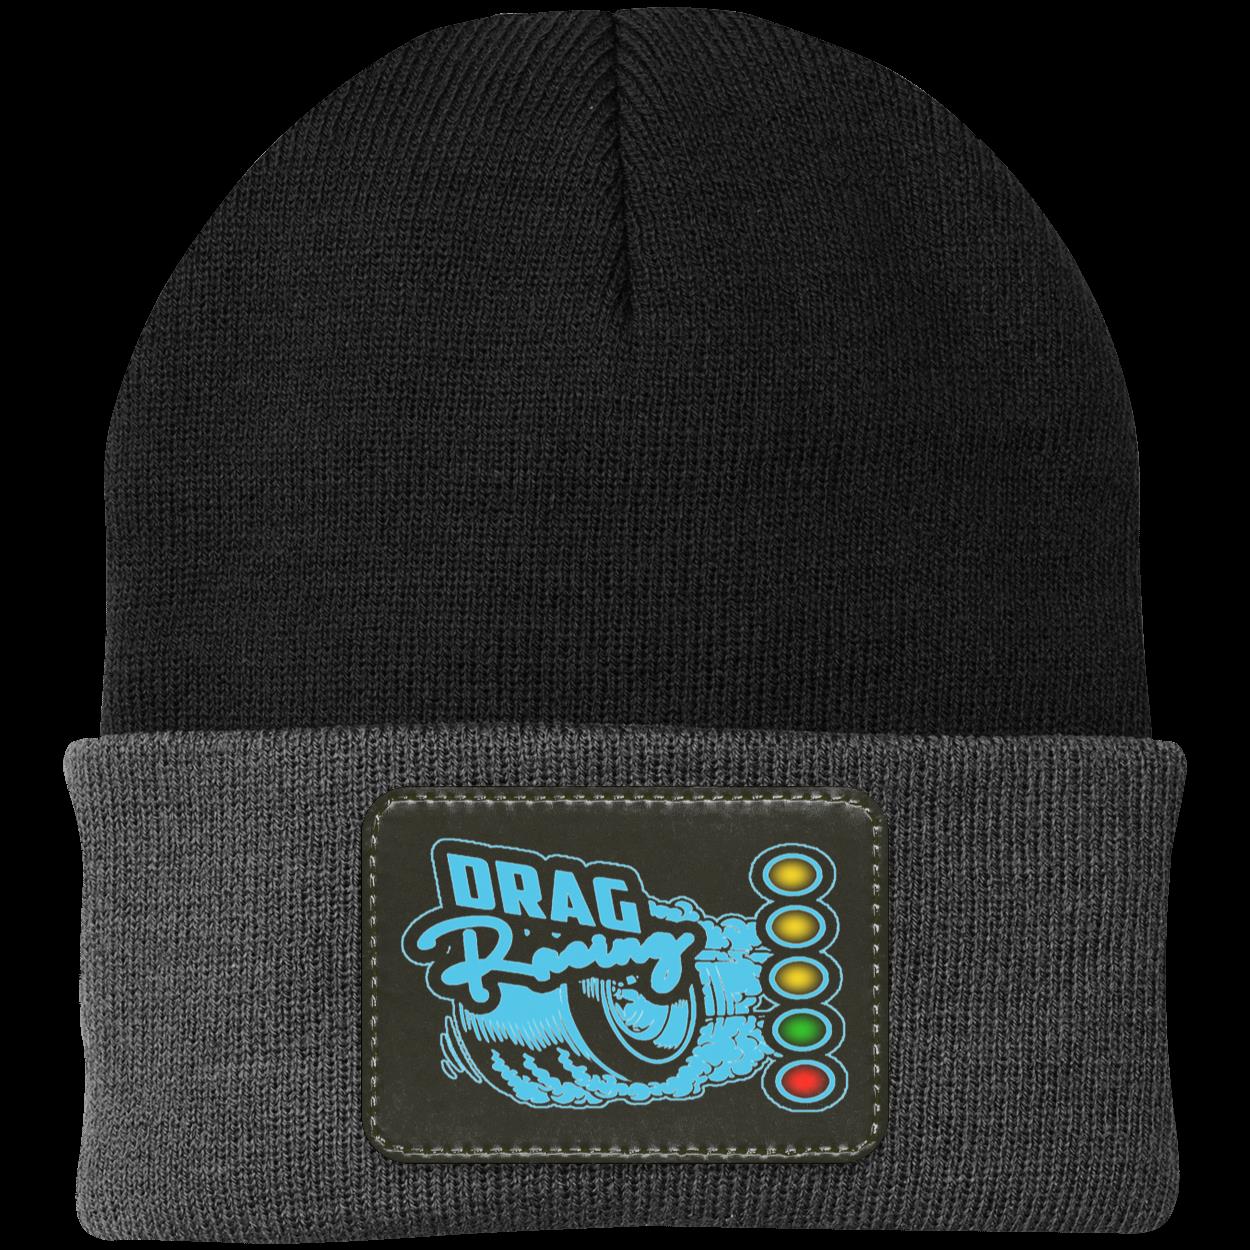 Drag Racing Patched Knit Cap V2